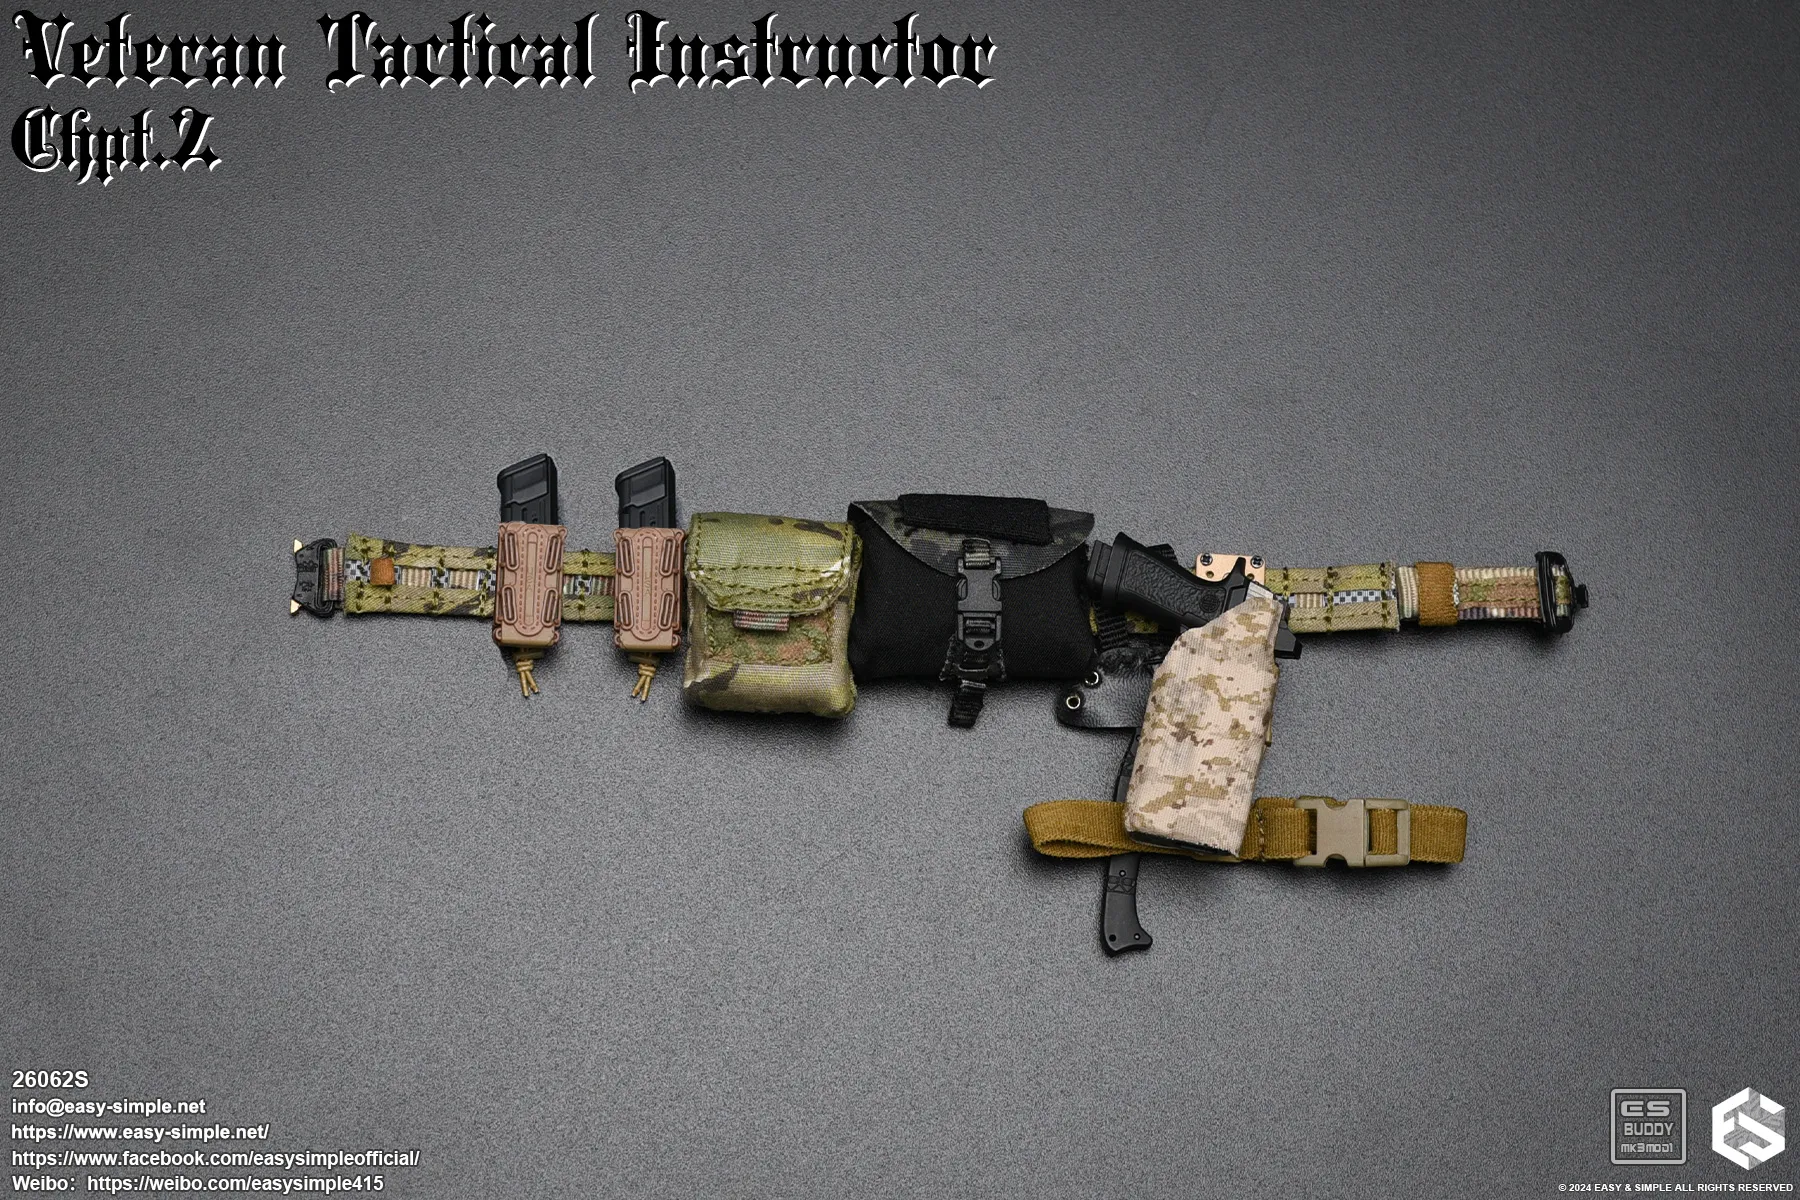 easy - NEW PRODUCT: Easy & Simple Veteran Tactical Instructor Chapter II 26062S Format,webp